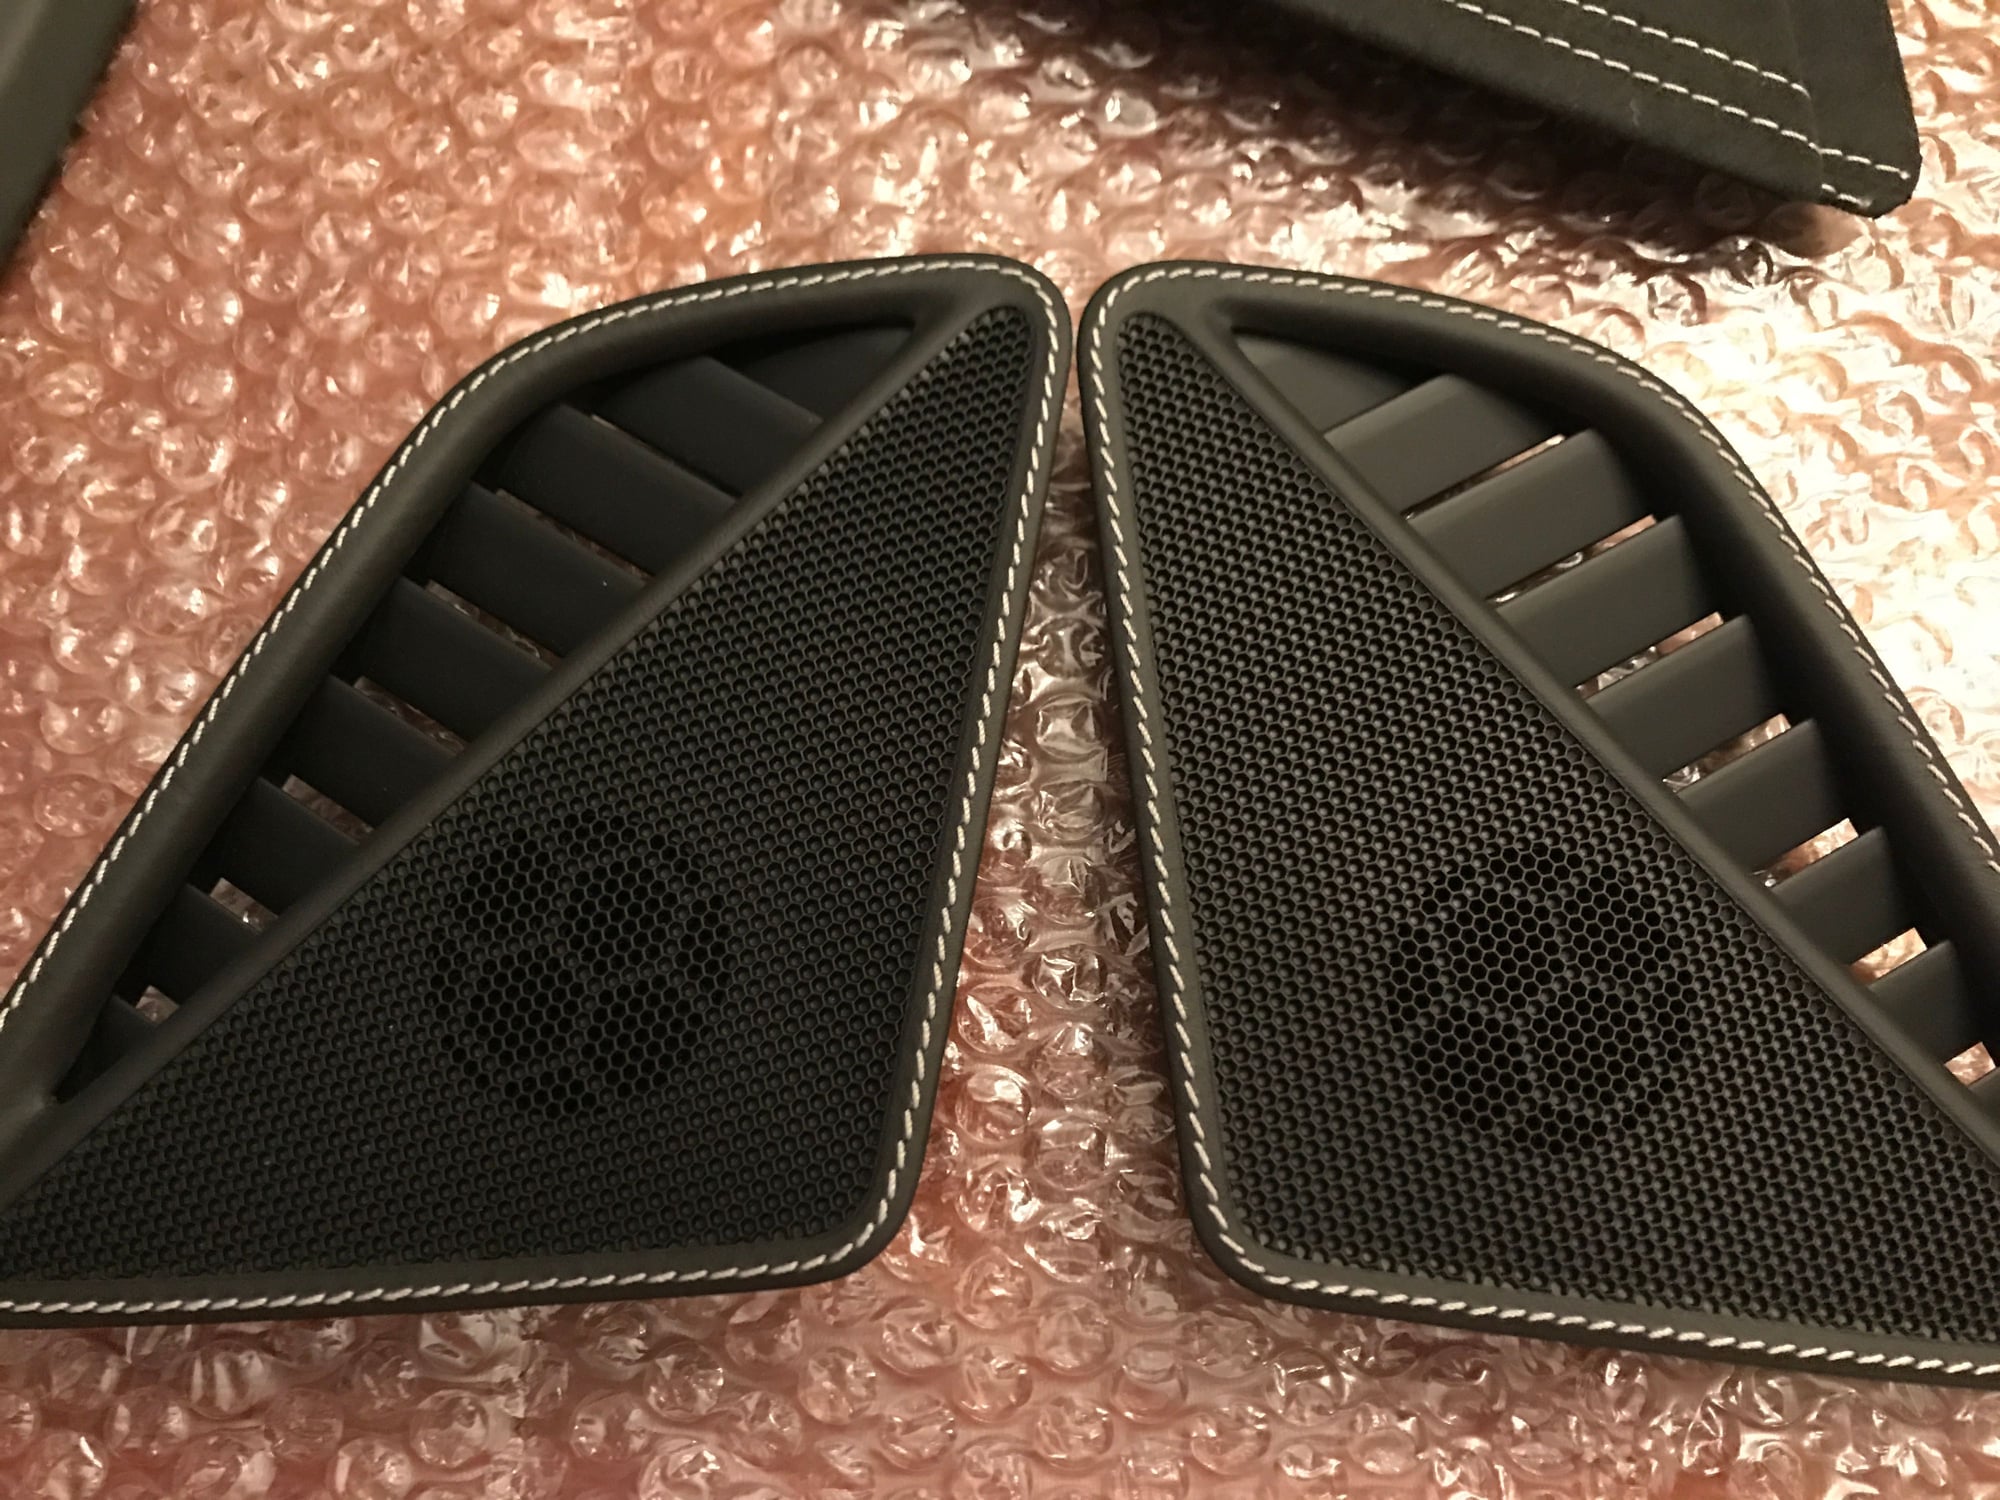 Interior/Upholstery - FS: Exclusive Option LEATHER parts (Steal these from me) - Used - 2013 to 2019 Porsche 911 - King Of Prussia, PA 19401, United States